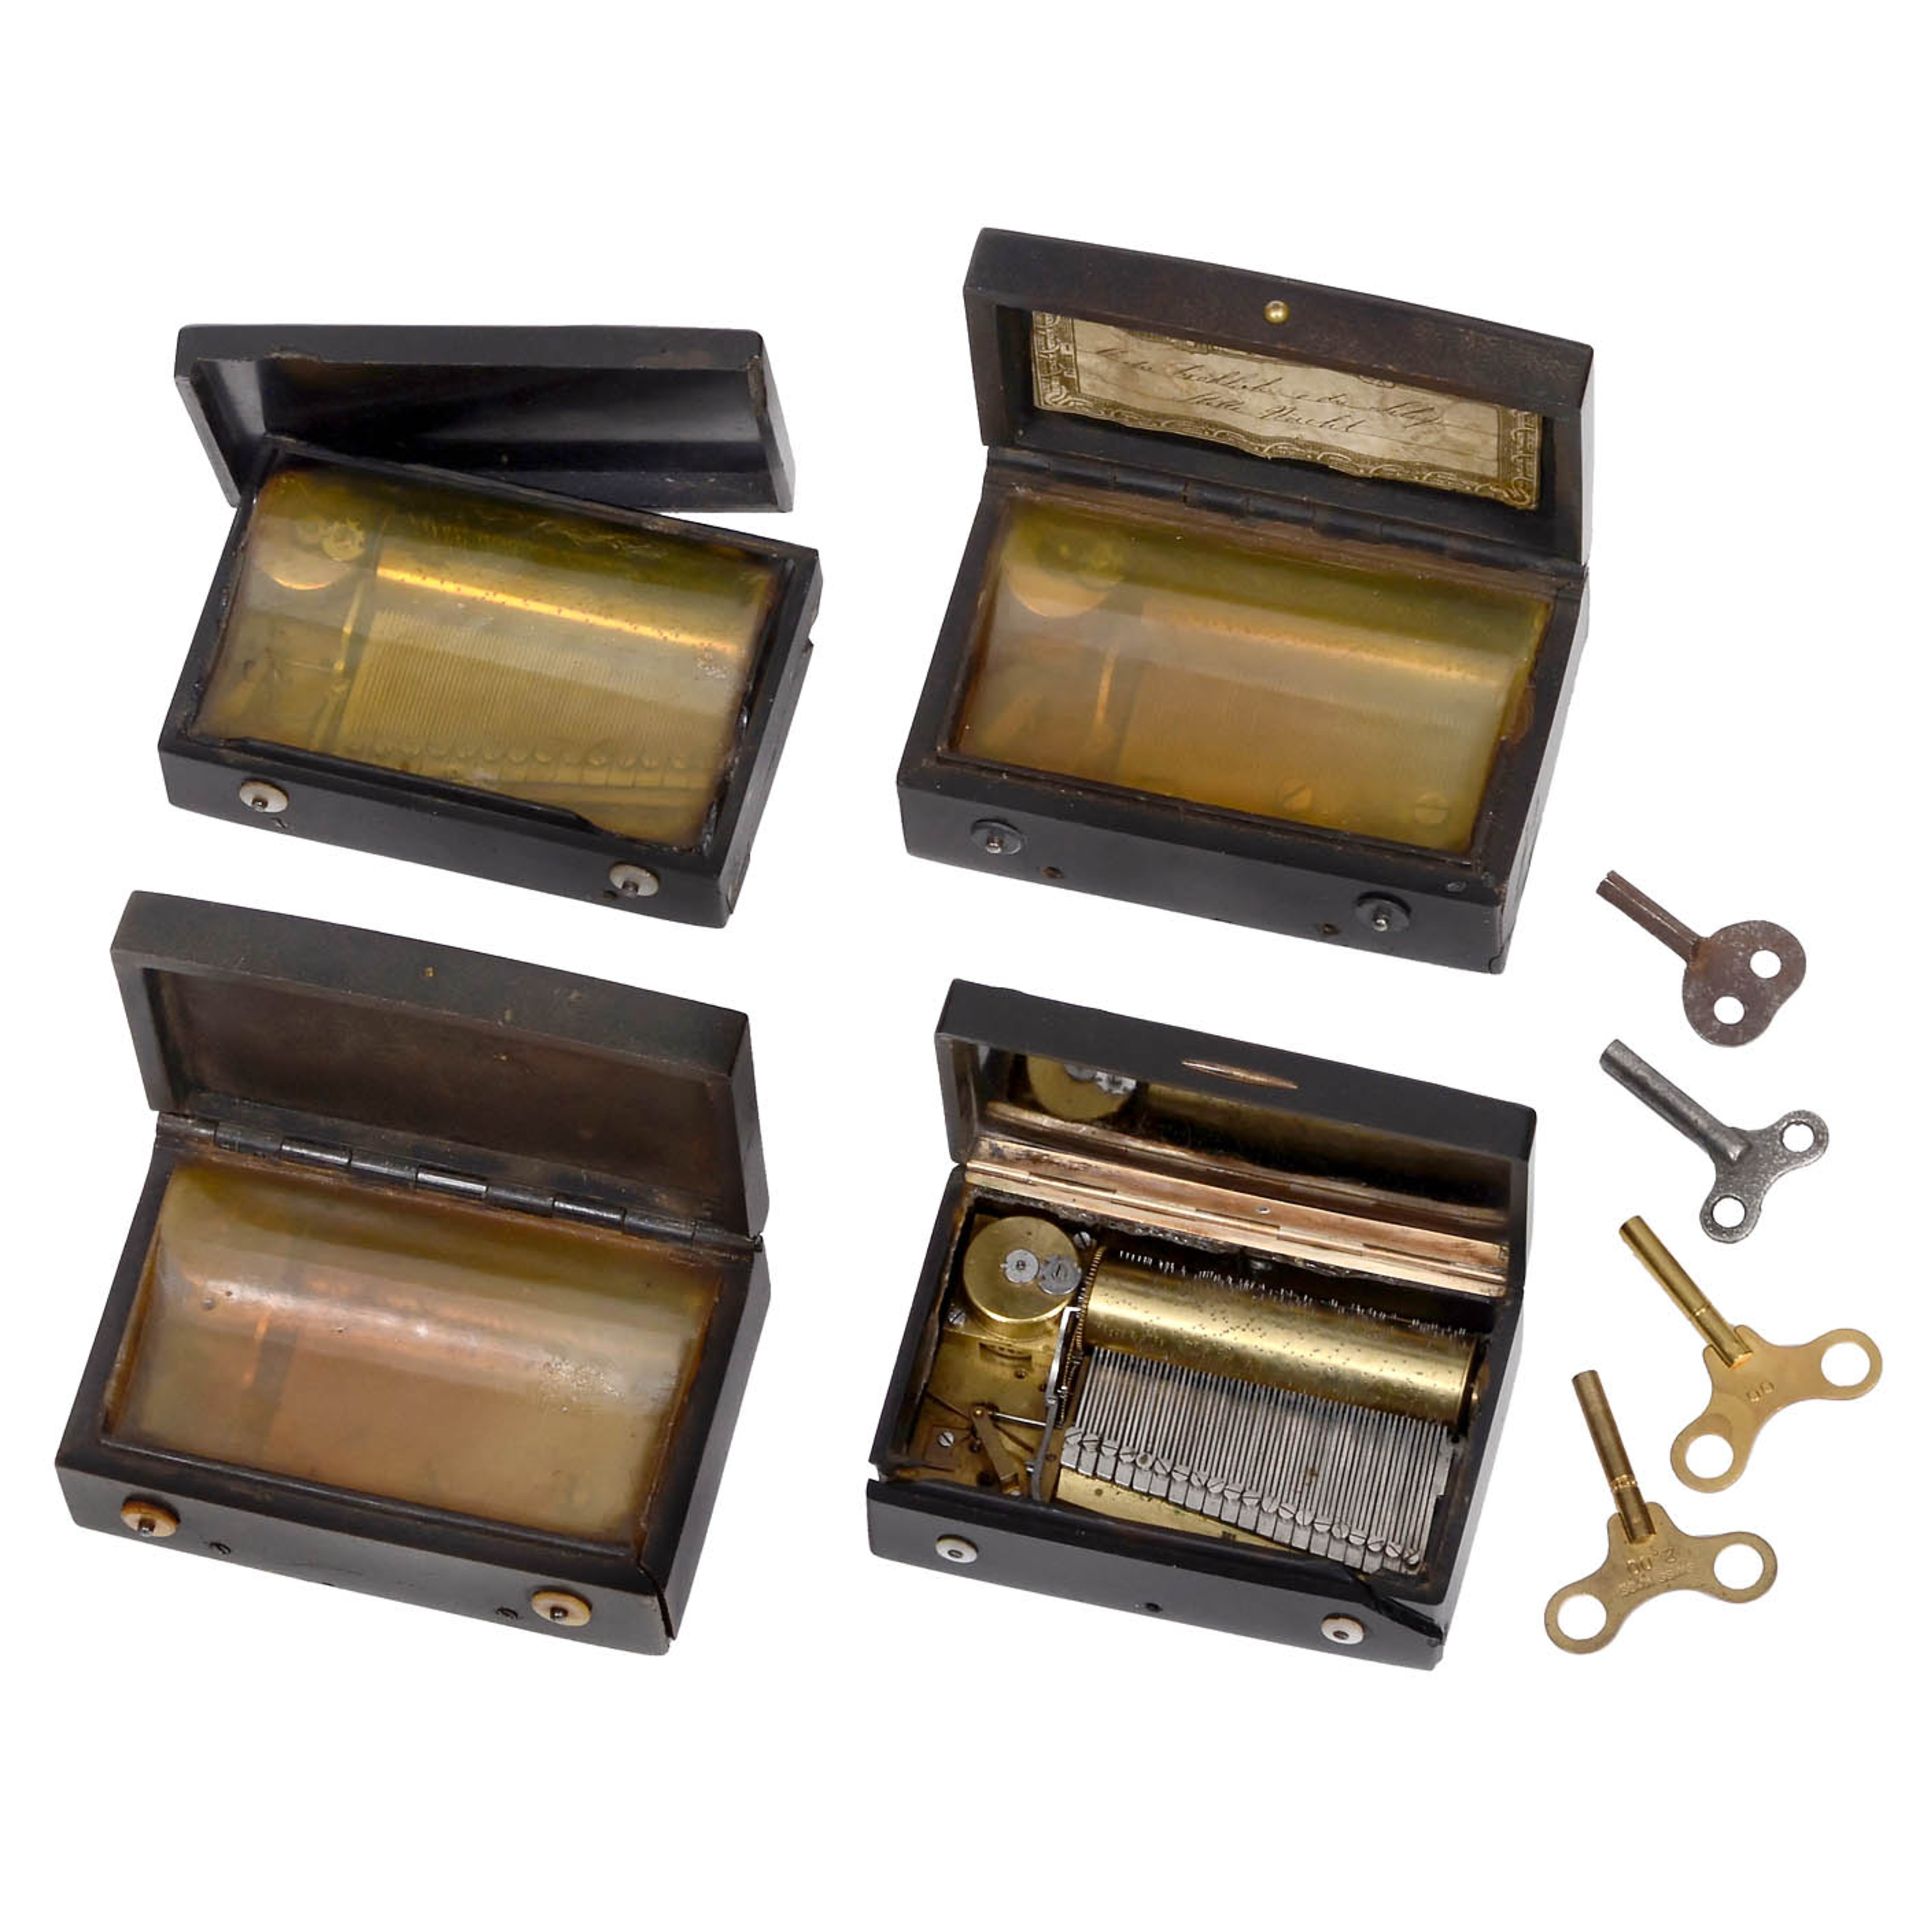 4 Musical Composition Snuff Boxes for Repair, c. 1860